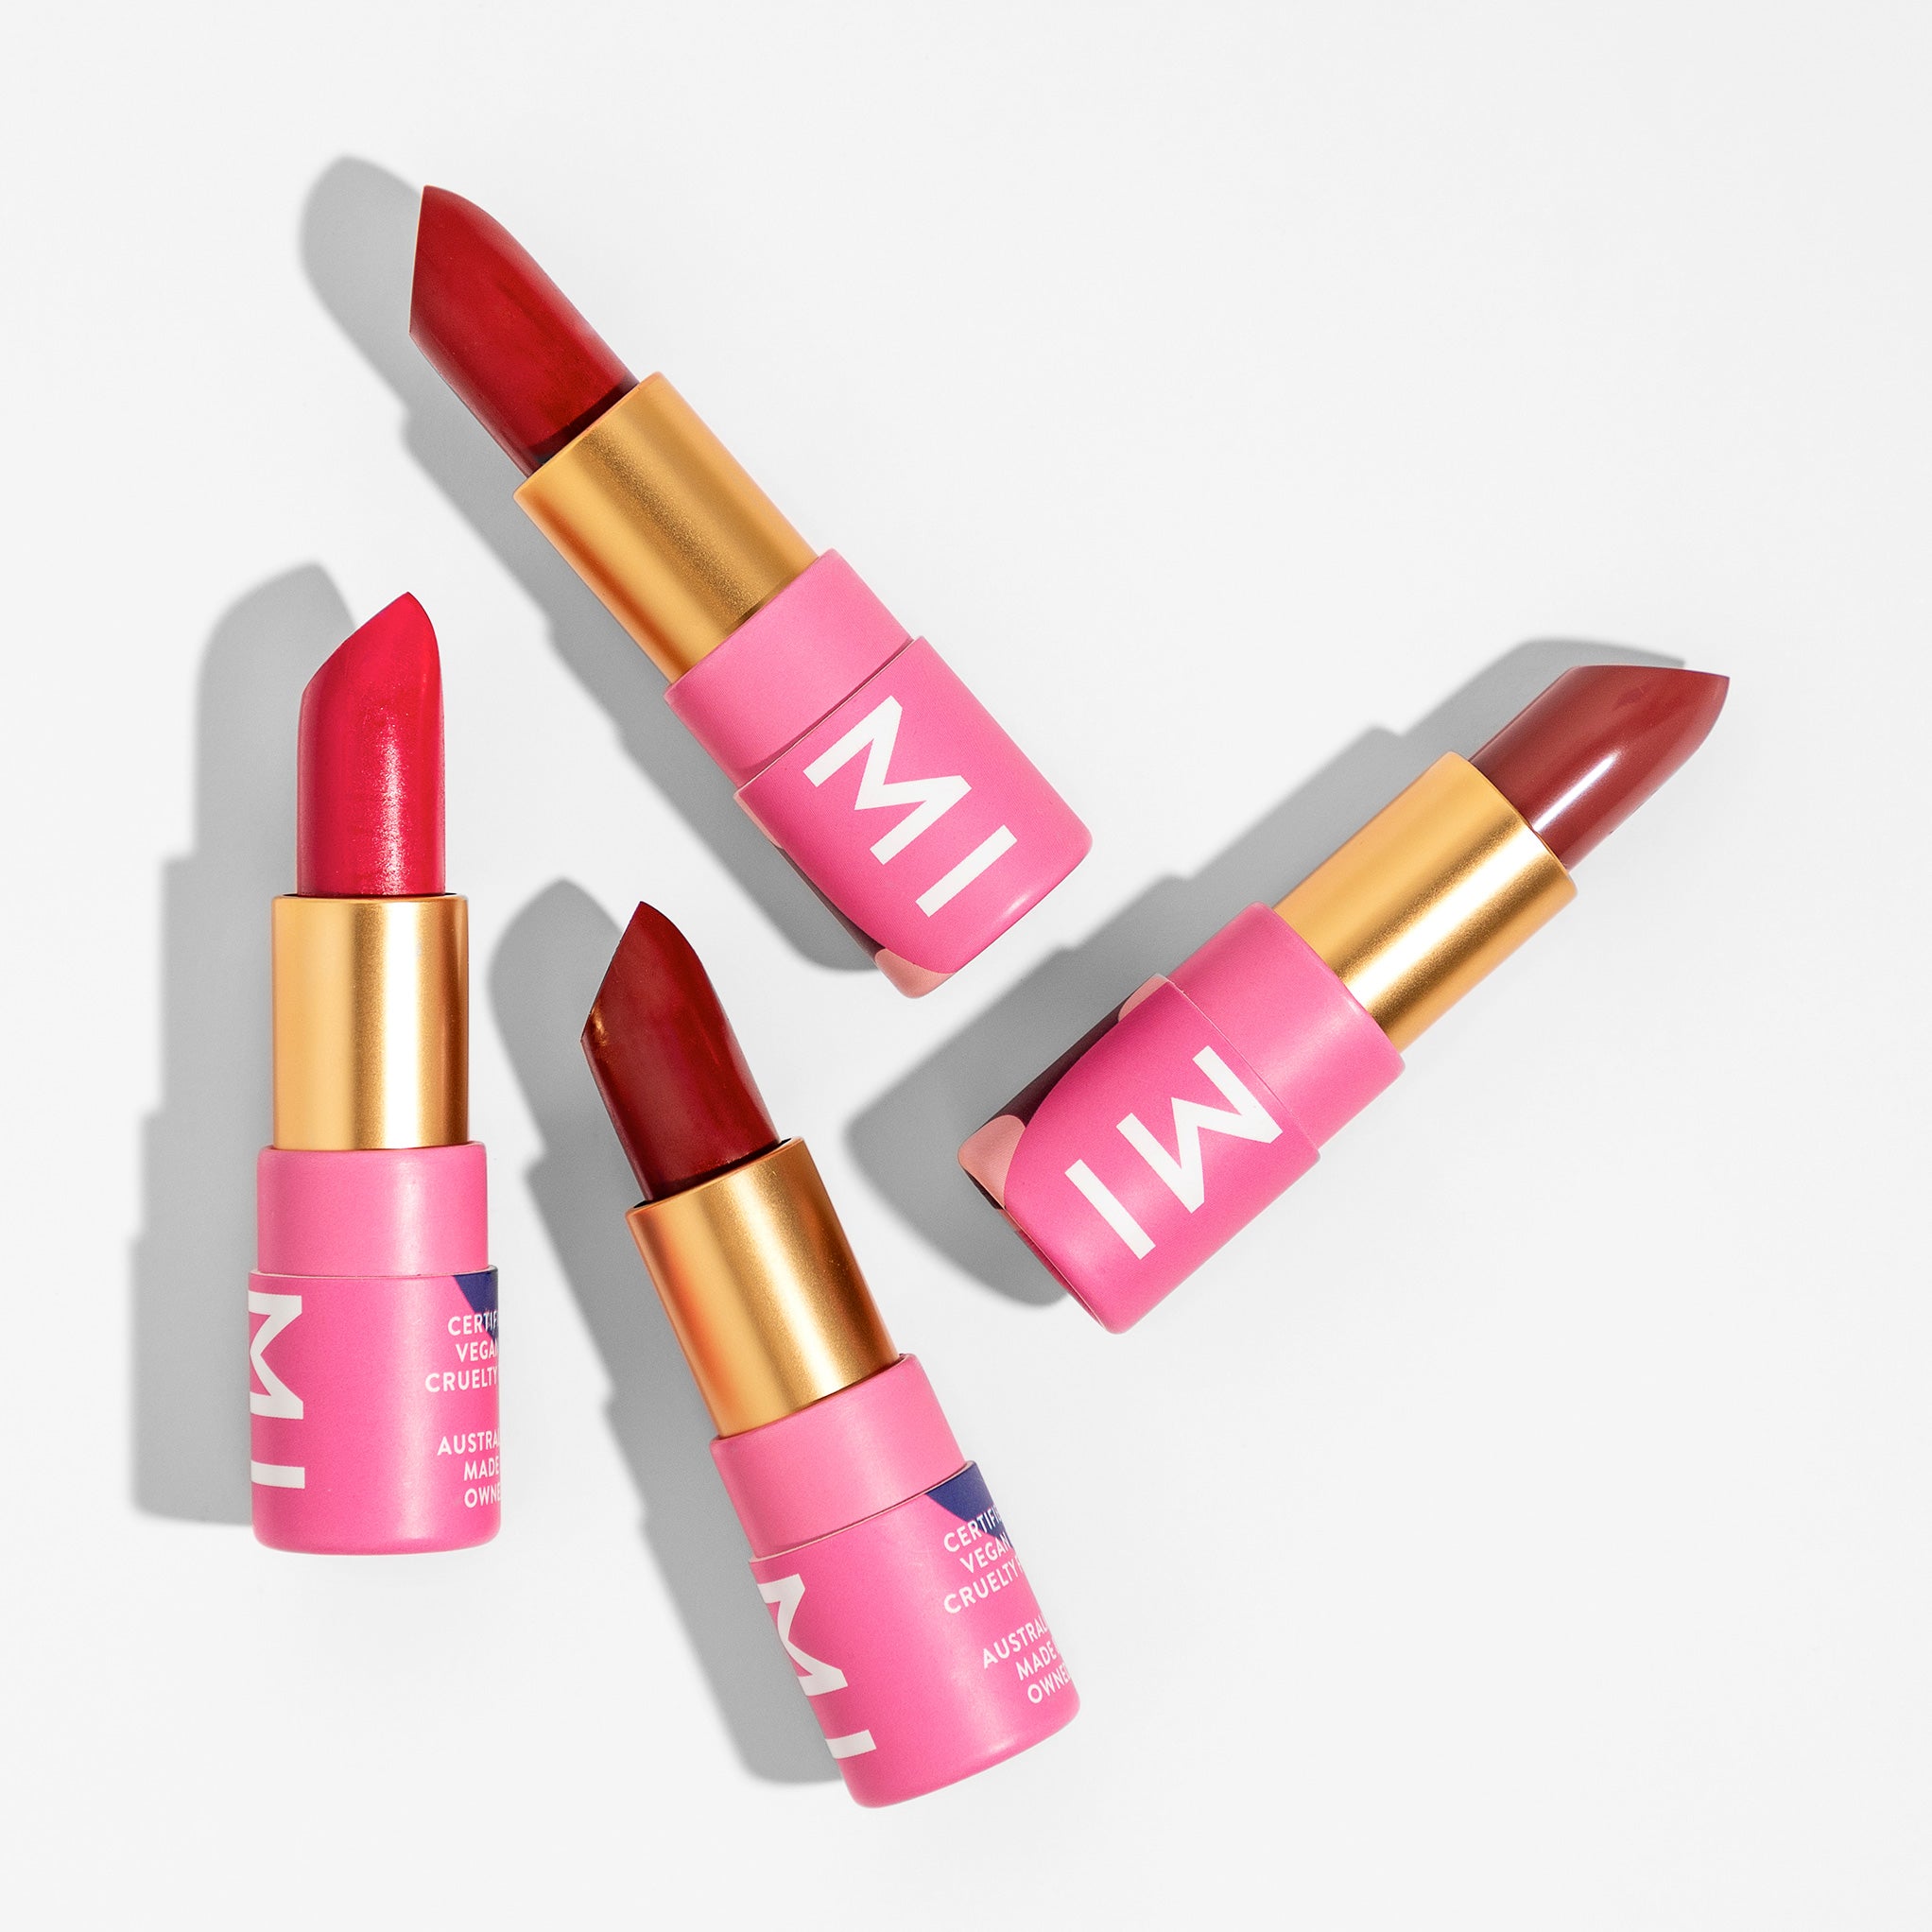 A selection of Hanami lipsticks in reds and pinks.